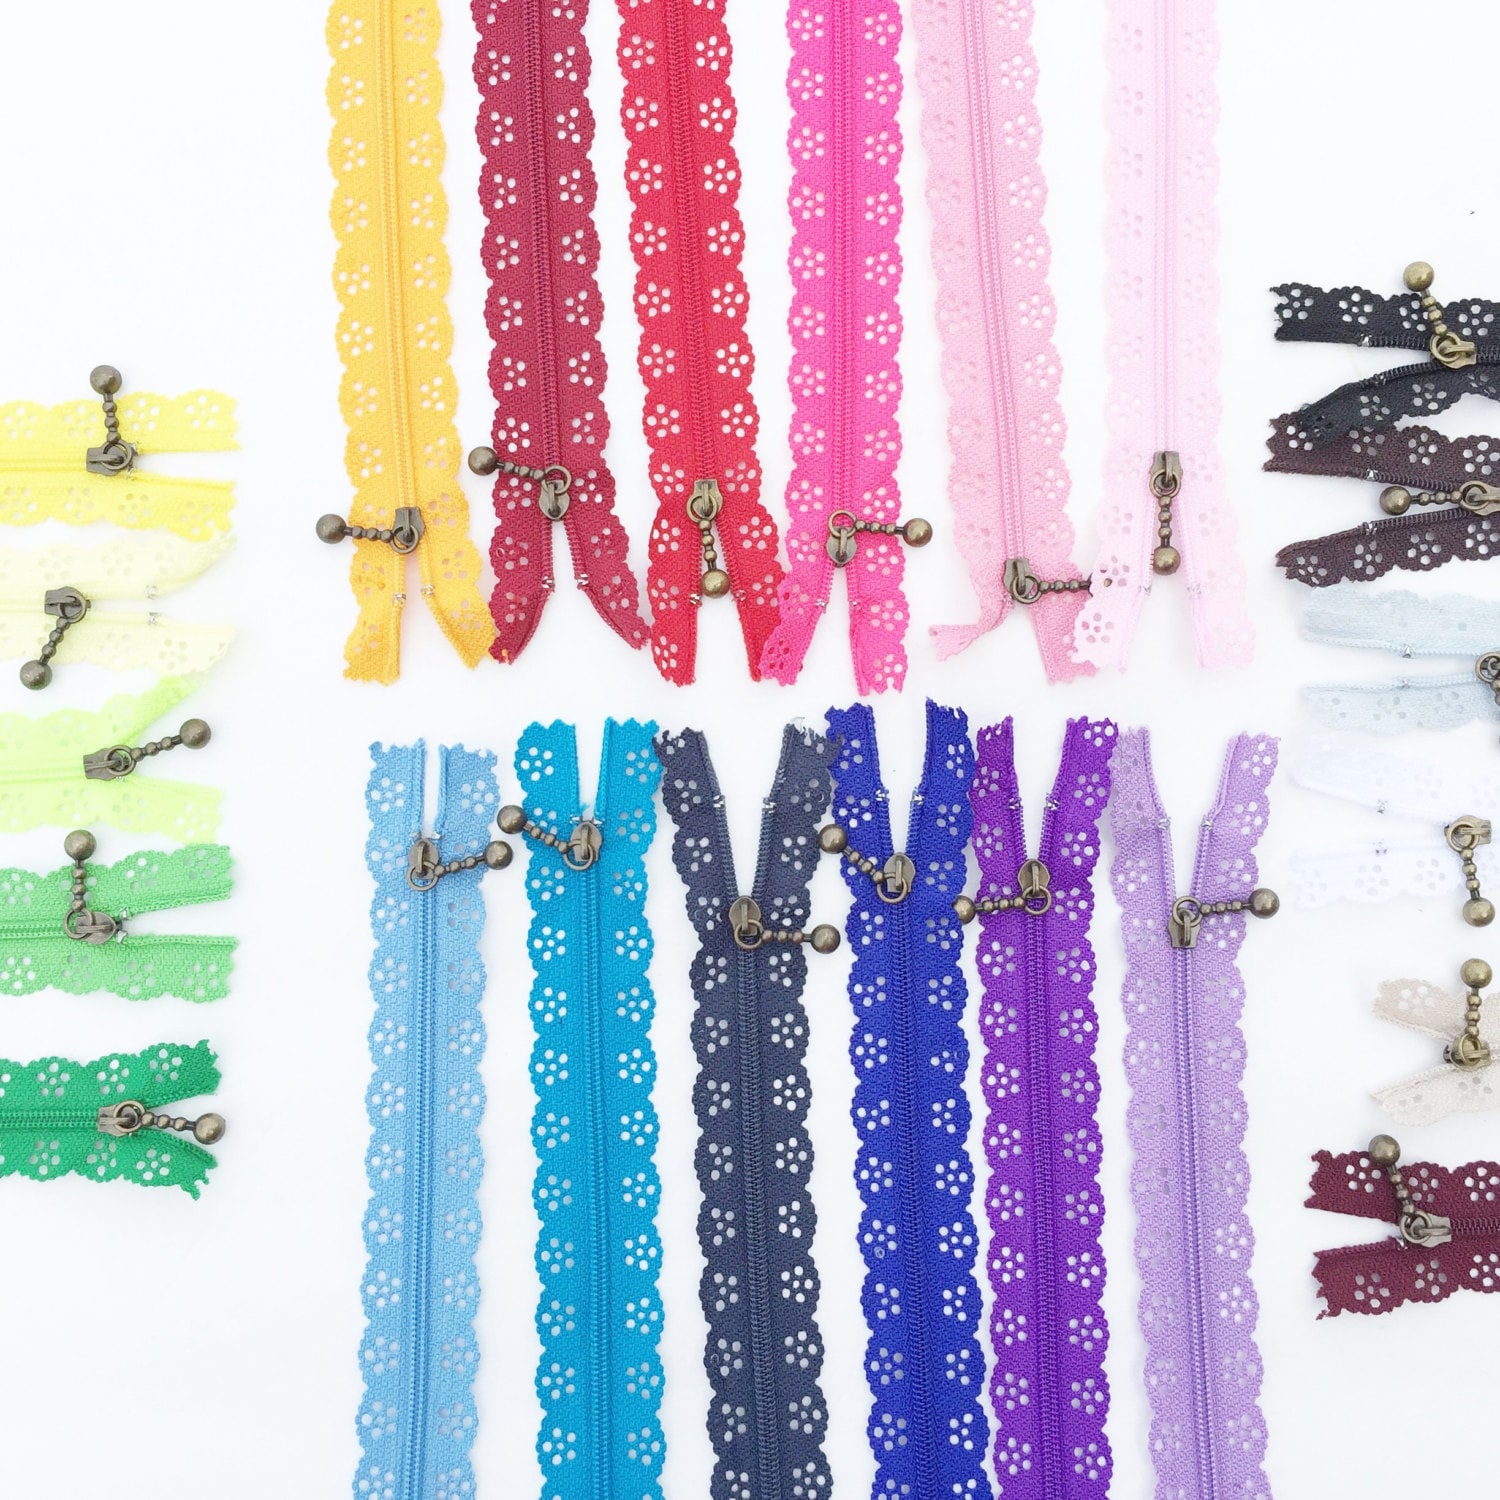 Lace Zippers for Sewing, Exposed Novelty Zippers with Decorative Lacy Edge for Sewing; 8 inch Bulk 40 Pcs, 20 Assorted Colors; by Mandala Crafts